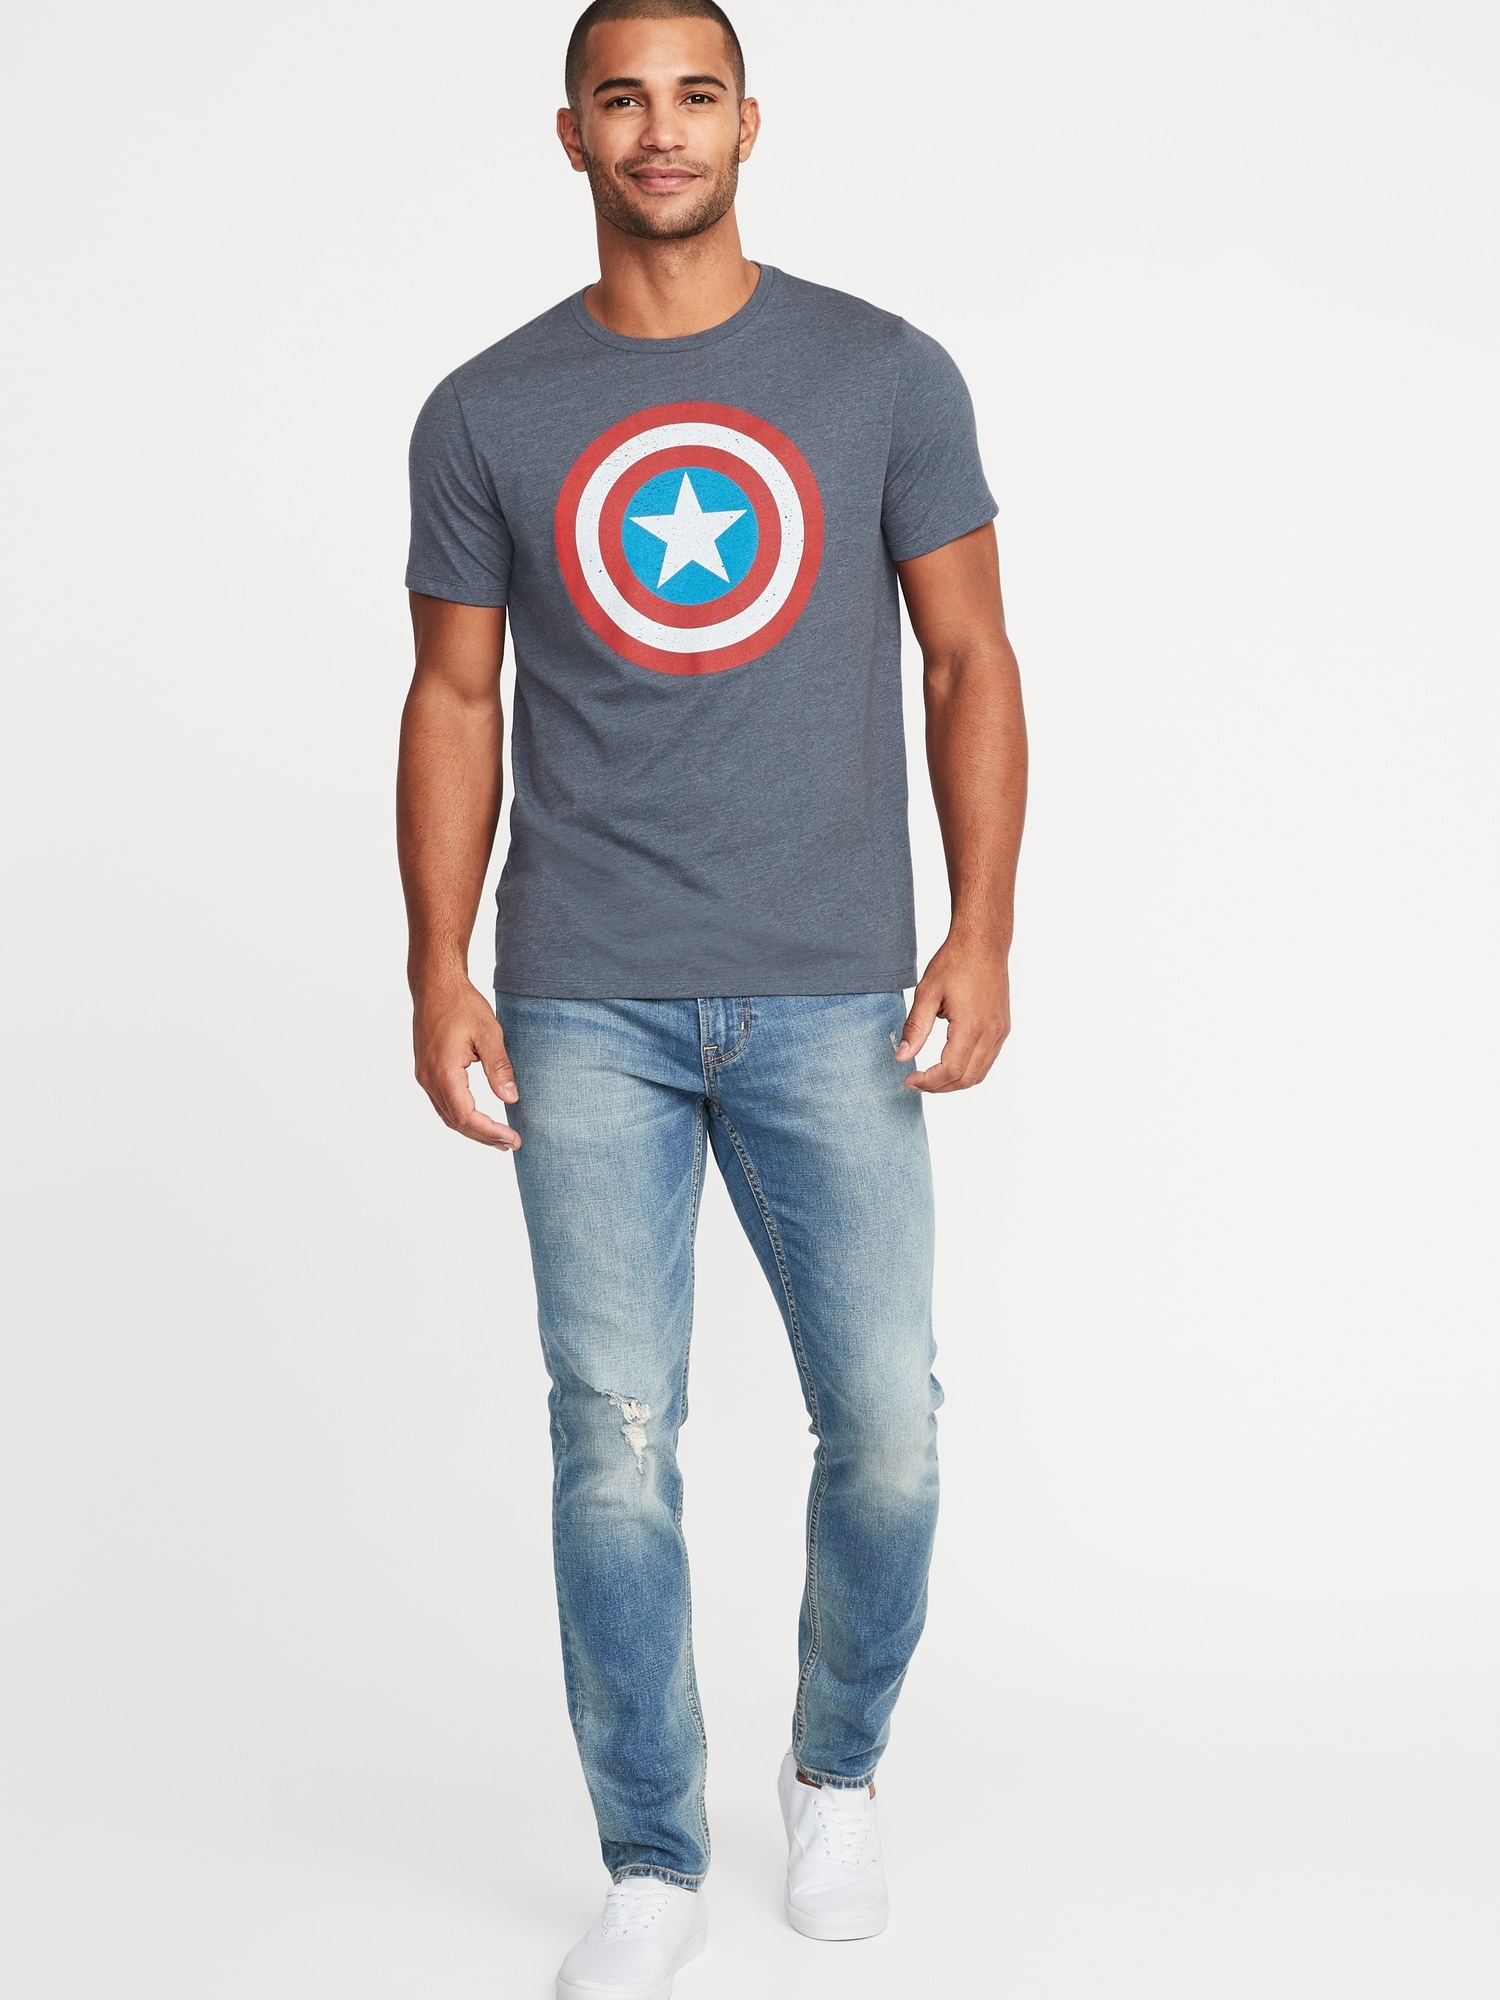 Marvel™ Captain America Graphic Gender Neutral Tee For Adults Old Navy 